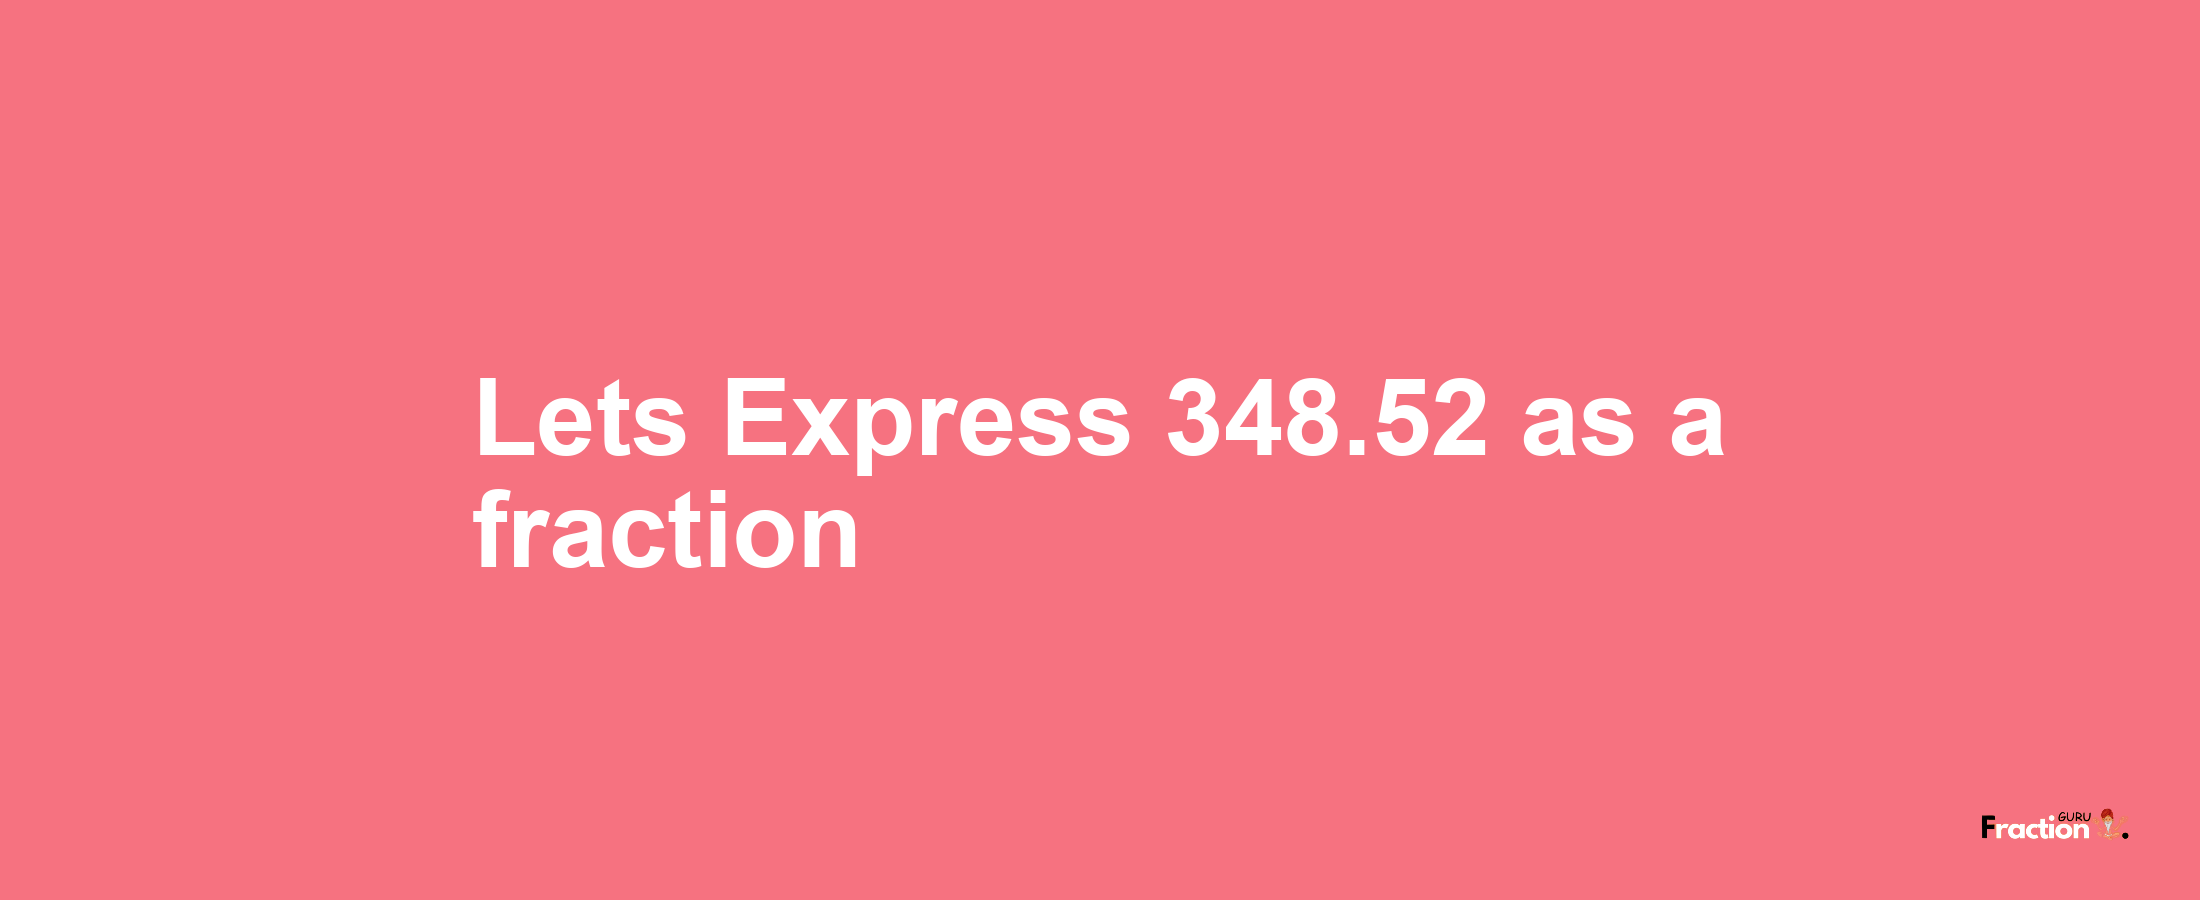 Lets Express 348.52 as afraction